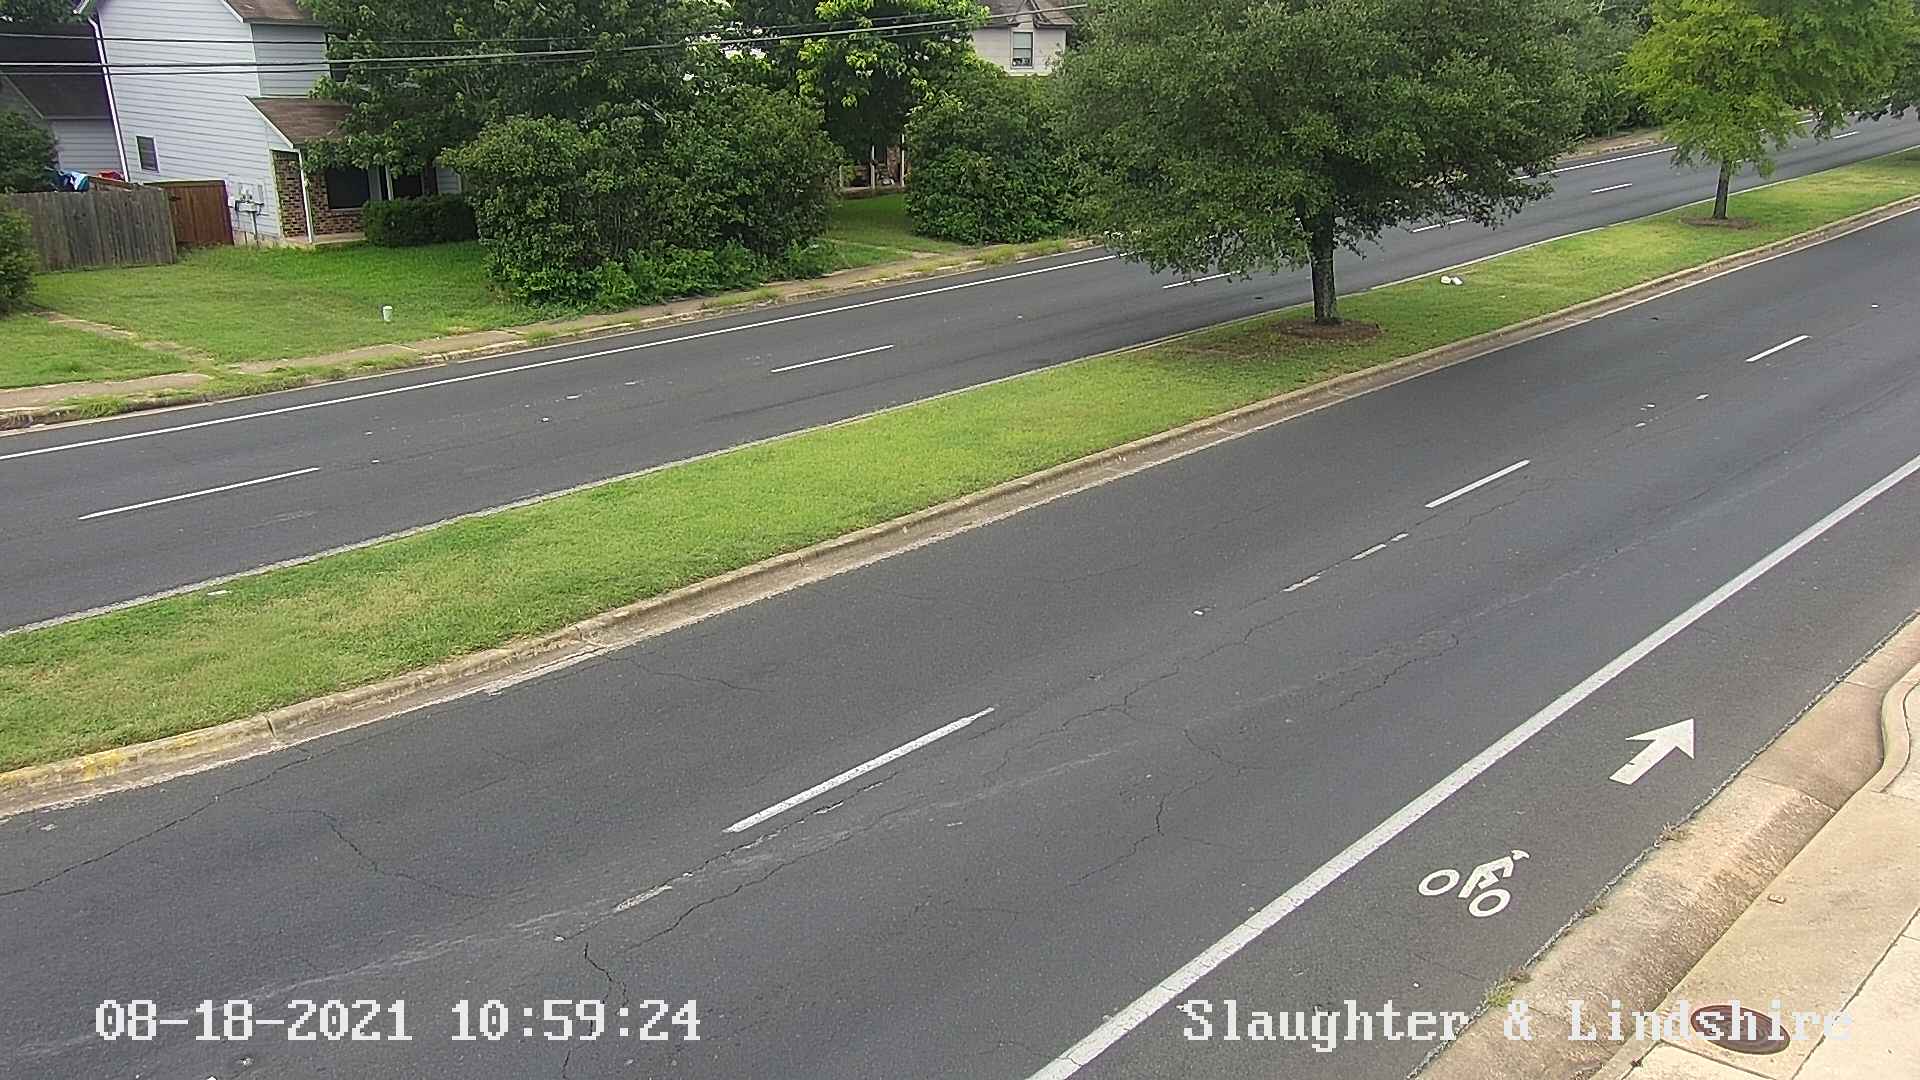 Traffic Cam  SLAUGHTER LN / LINDSHIRE LN